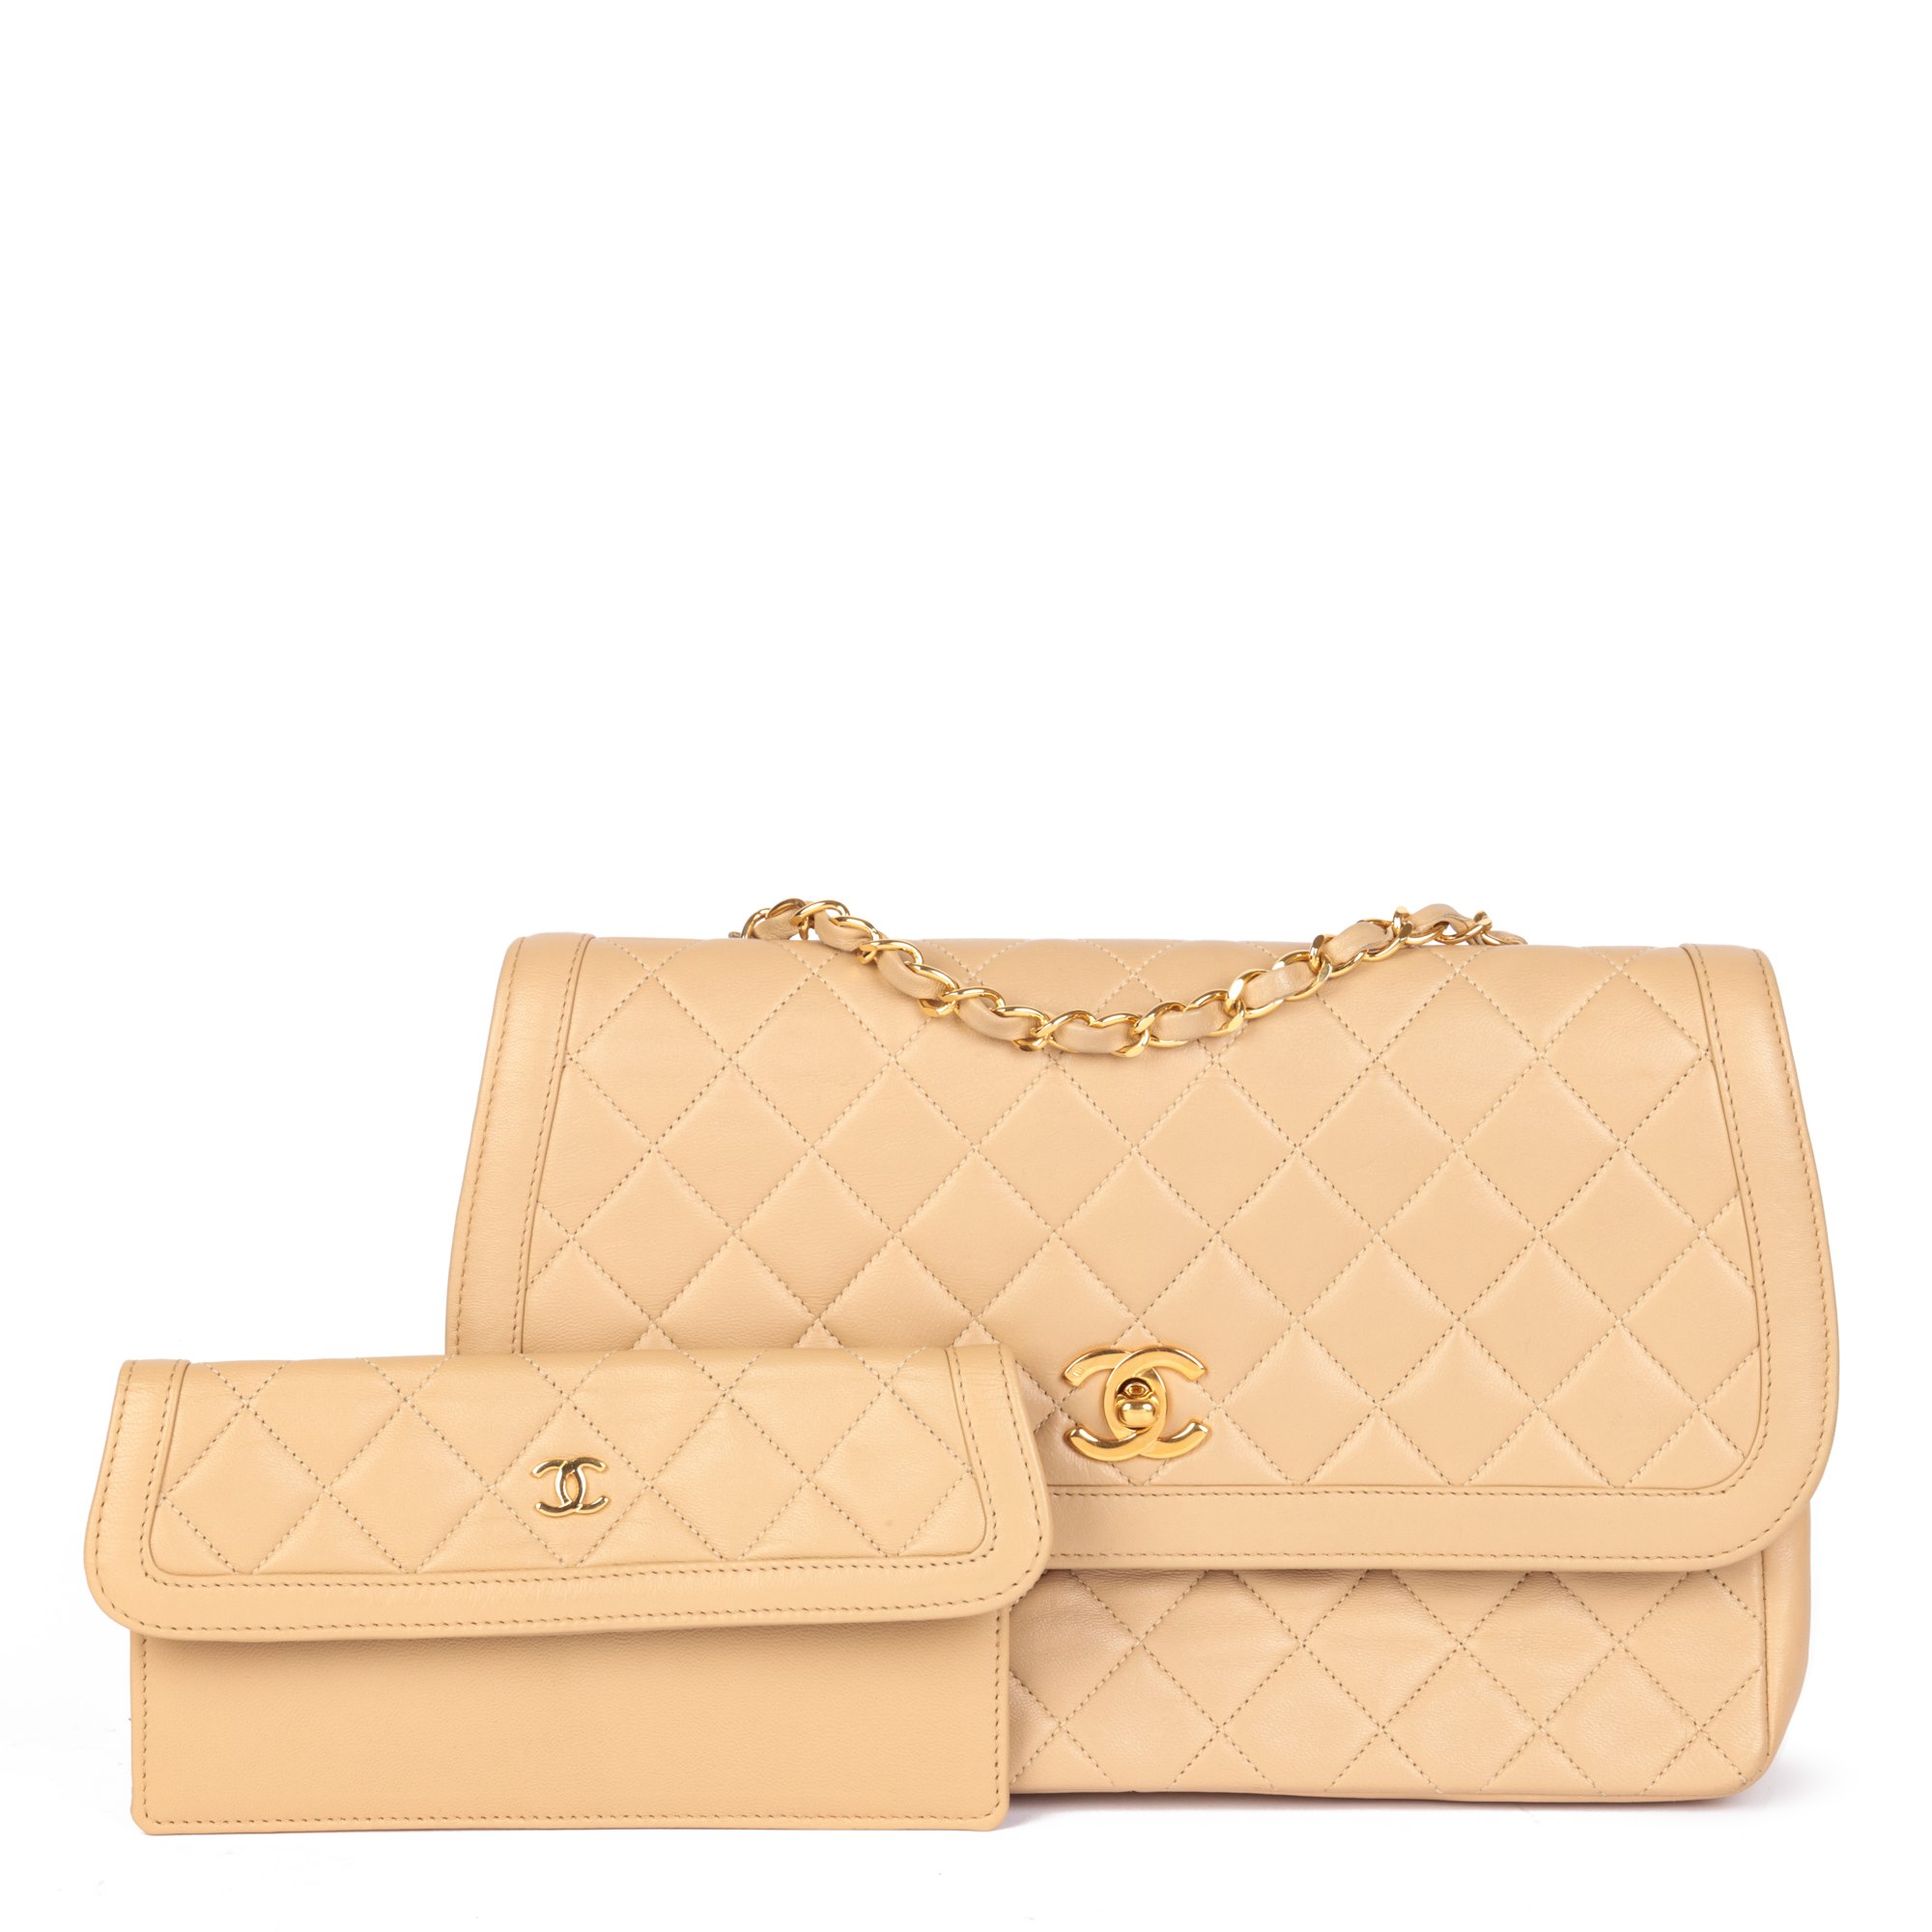 Chanel Beige Quilted Lambskin Vintage Medium Classic Single Flap Bag with Wallet